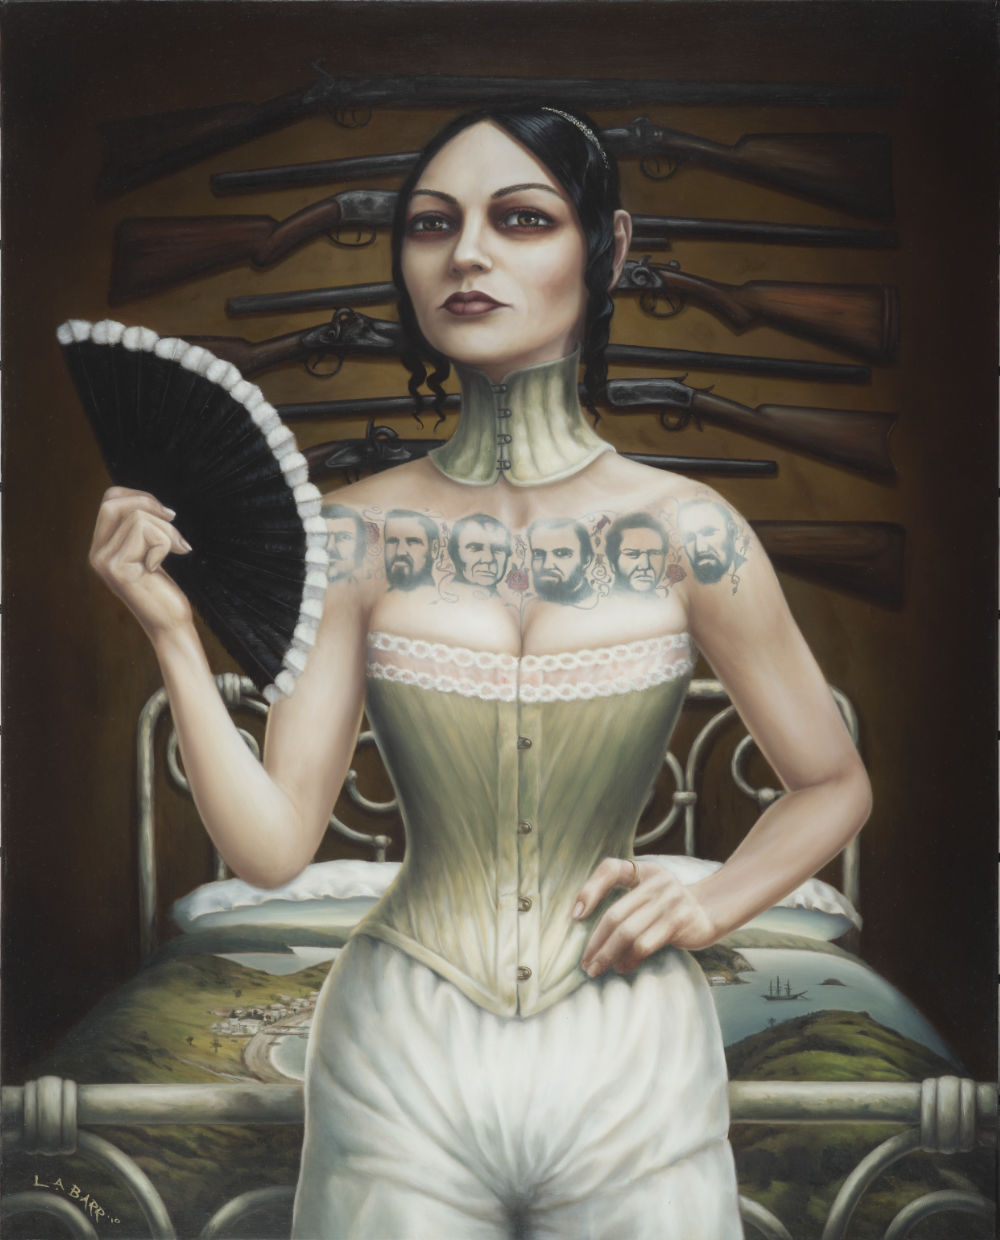 prostitute from Kororareka with Huia fan and rifles, painting by Liam Barr